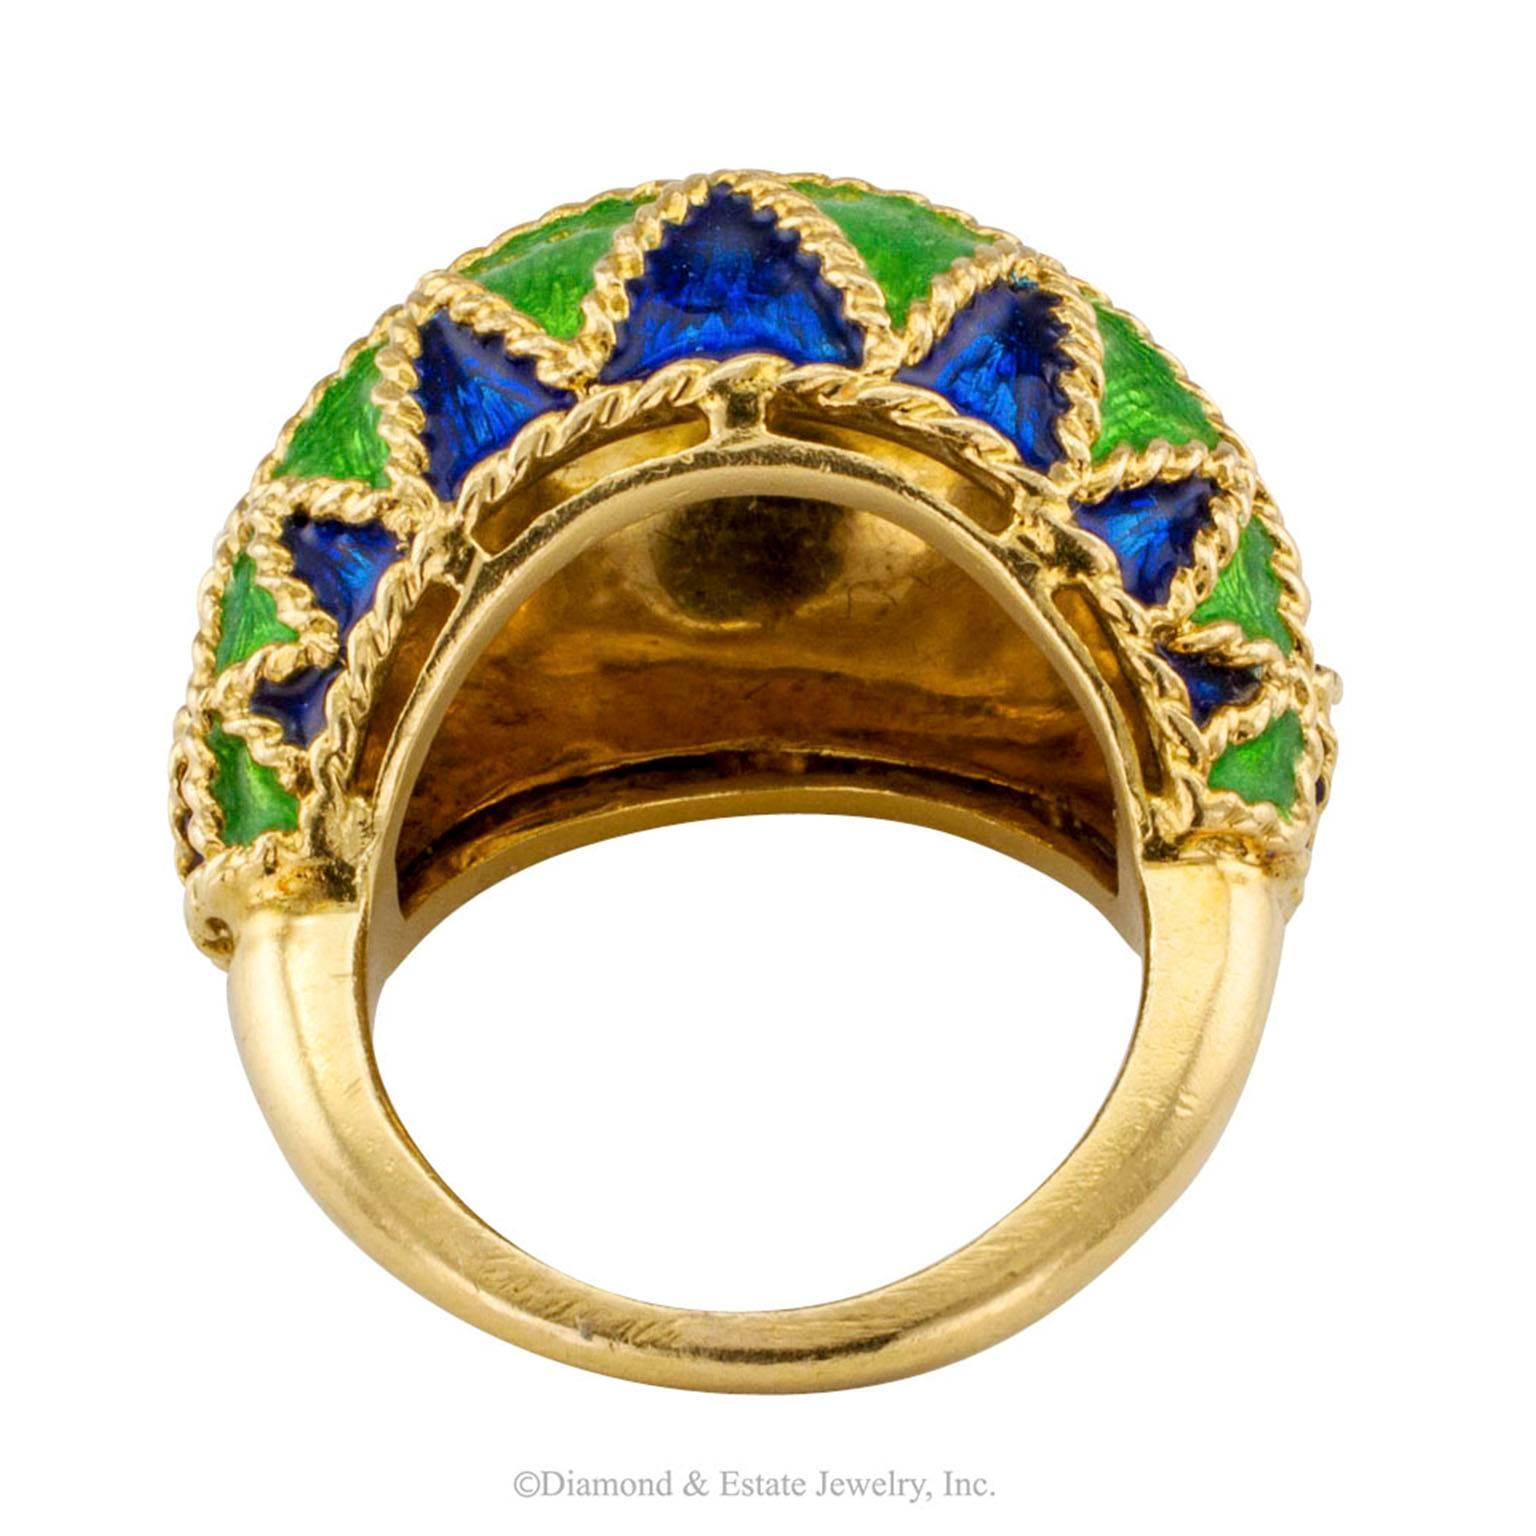 Women's or Men's 1970s Domed Gold Ring with Blue and Green Enamel